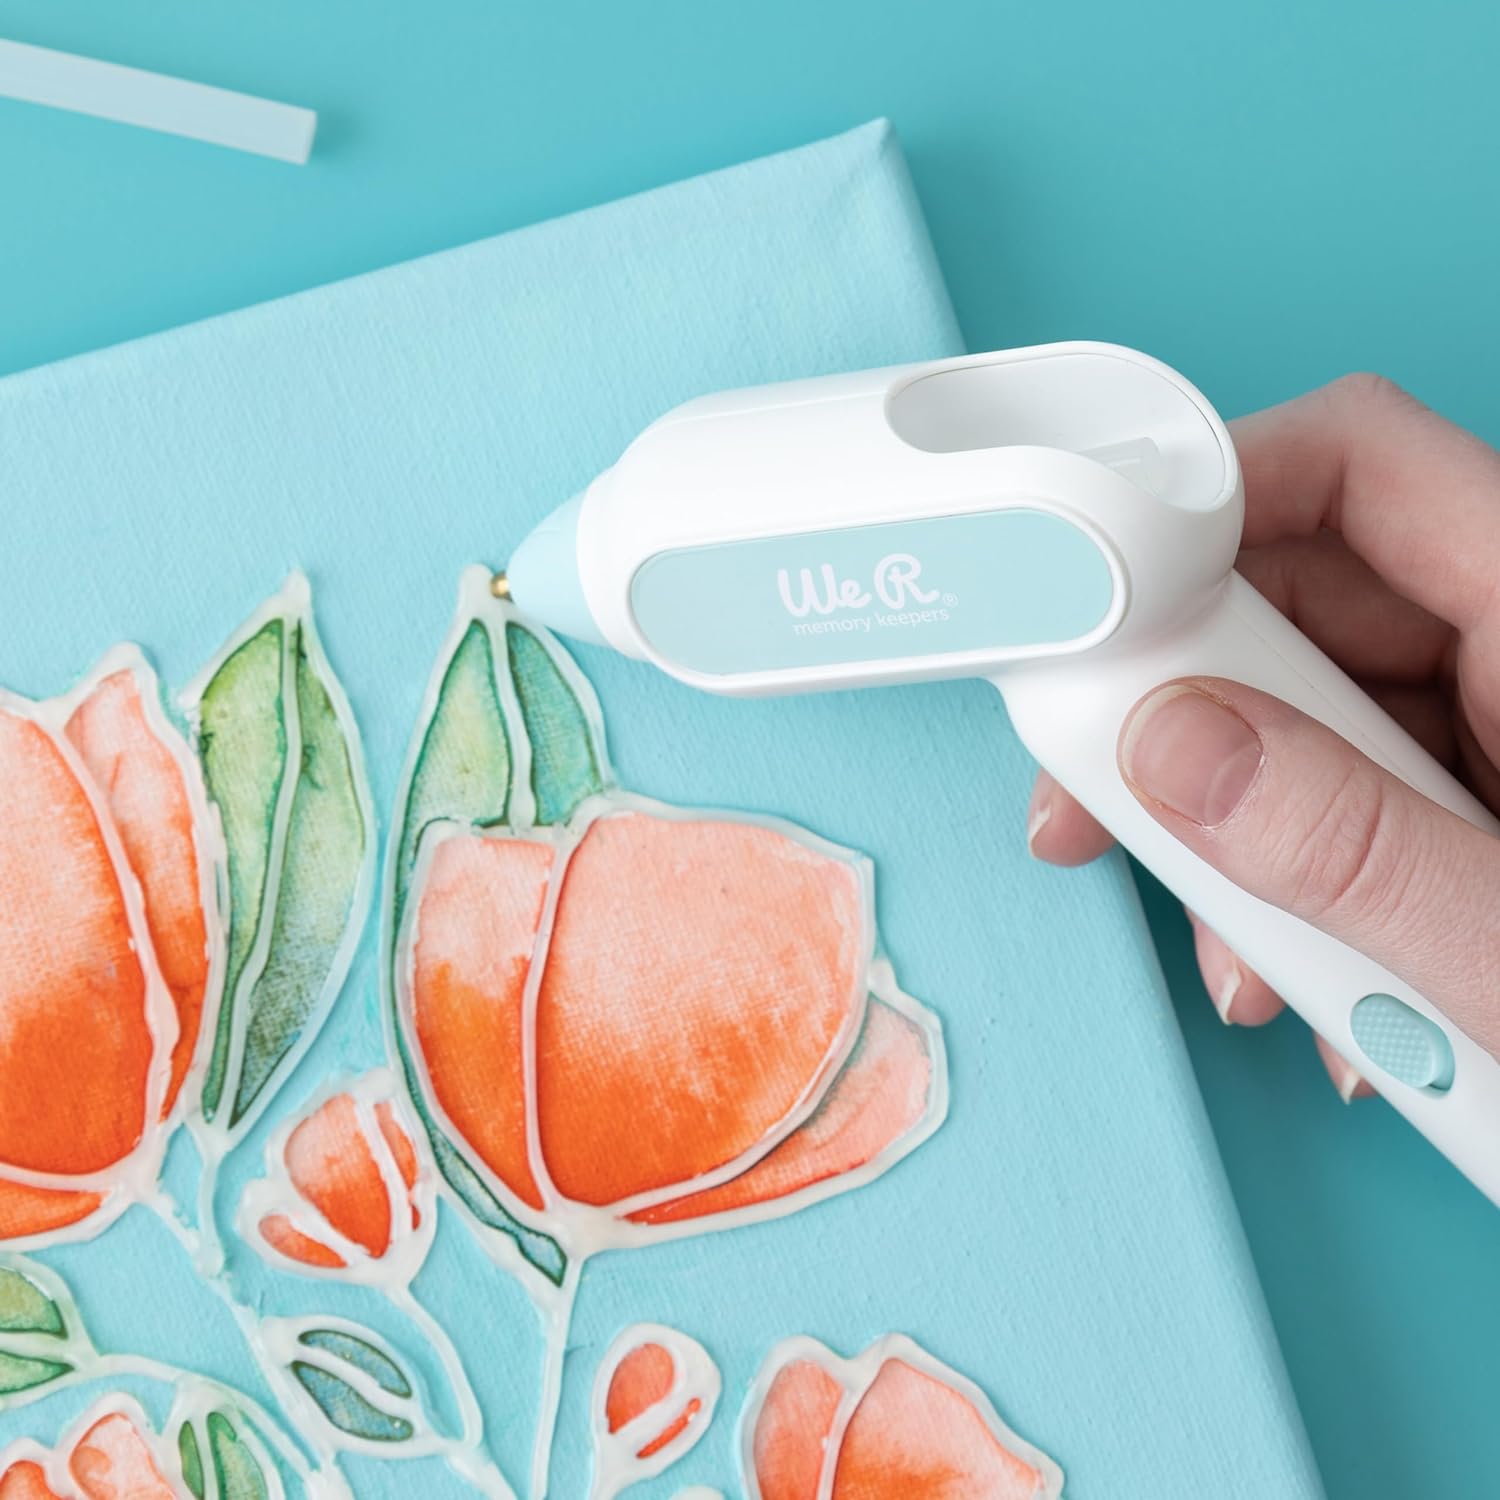 Lifestyle photo of We R Makers Creative Flow Glue Gun in use